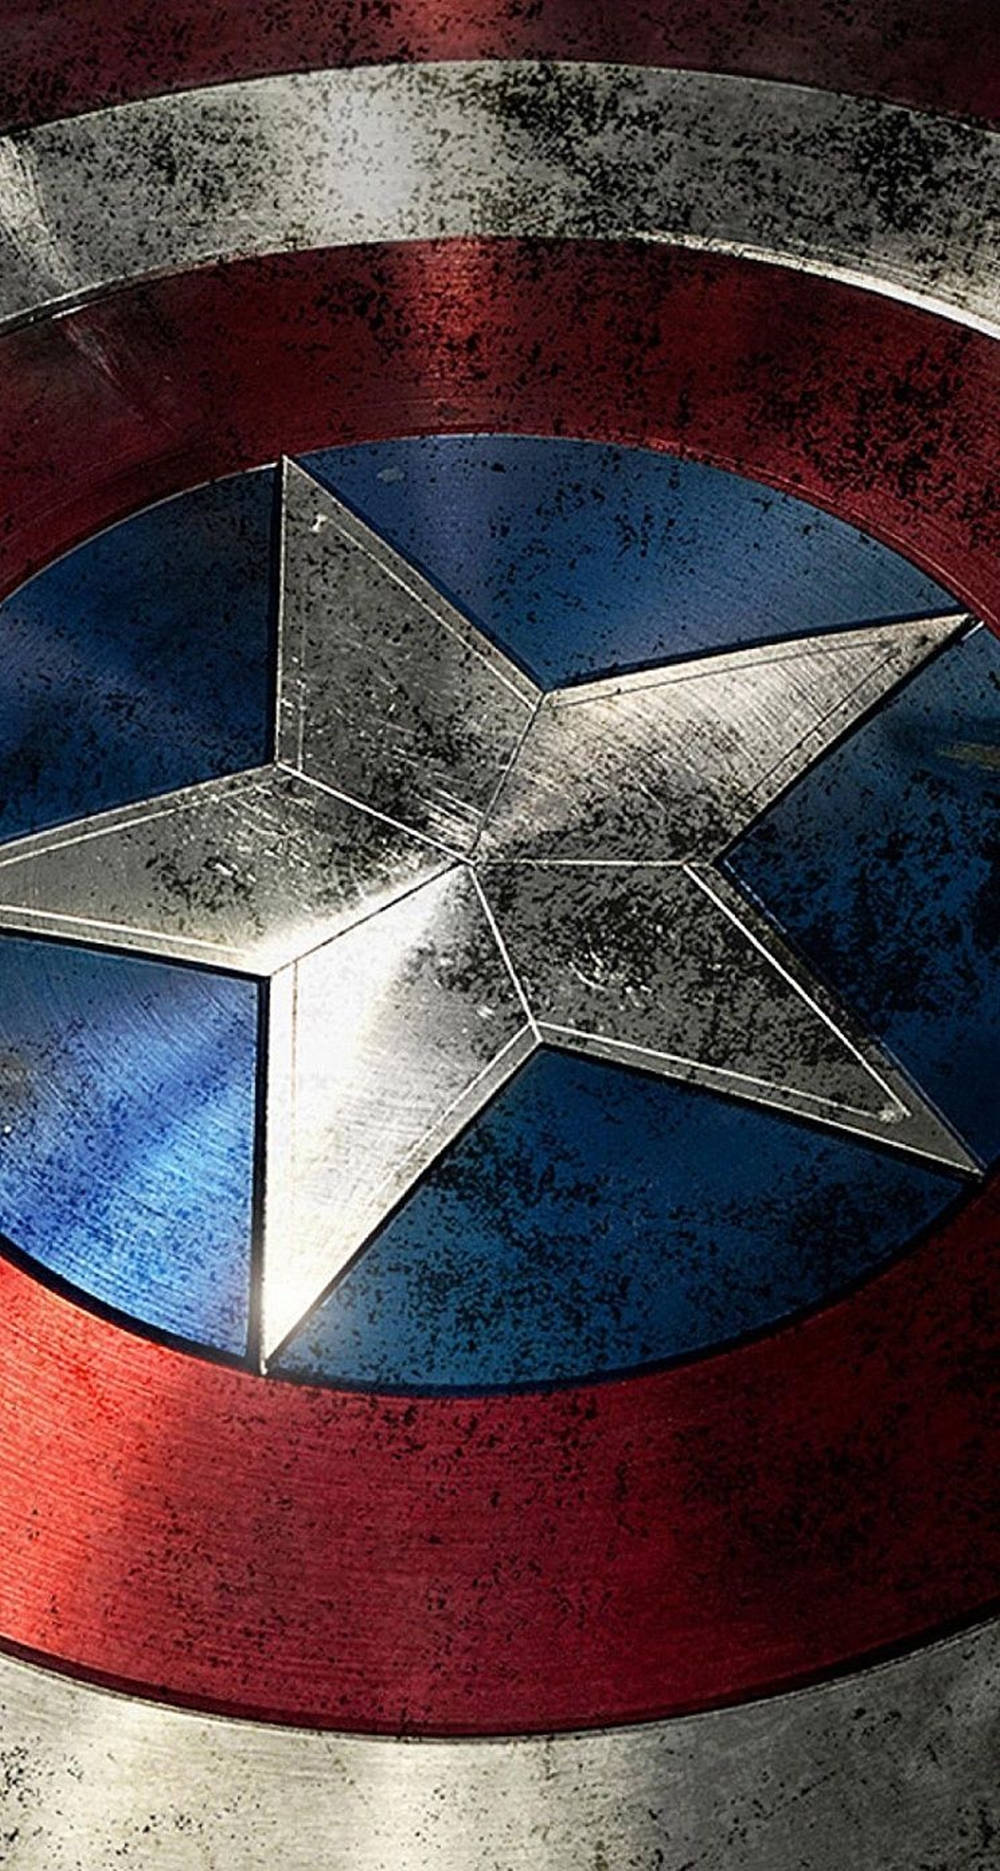 Captain America Shield Iphone Stainless Steel Wallpaper